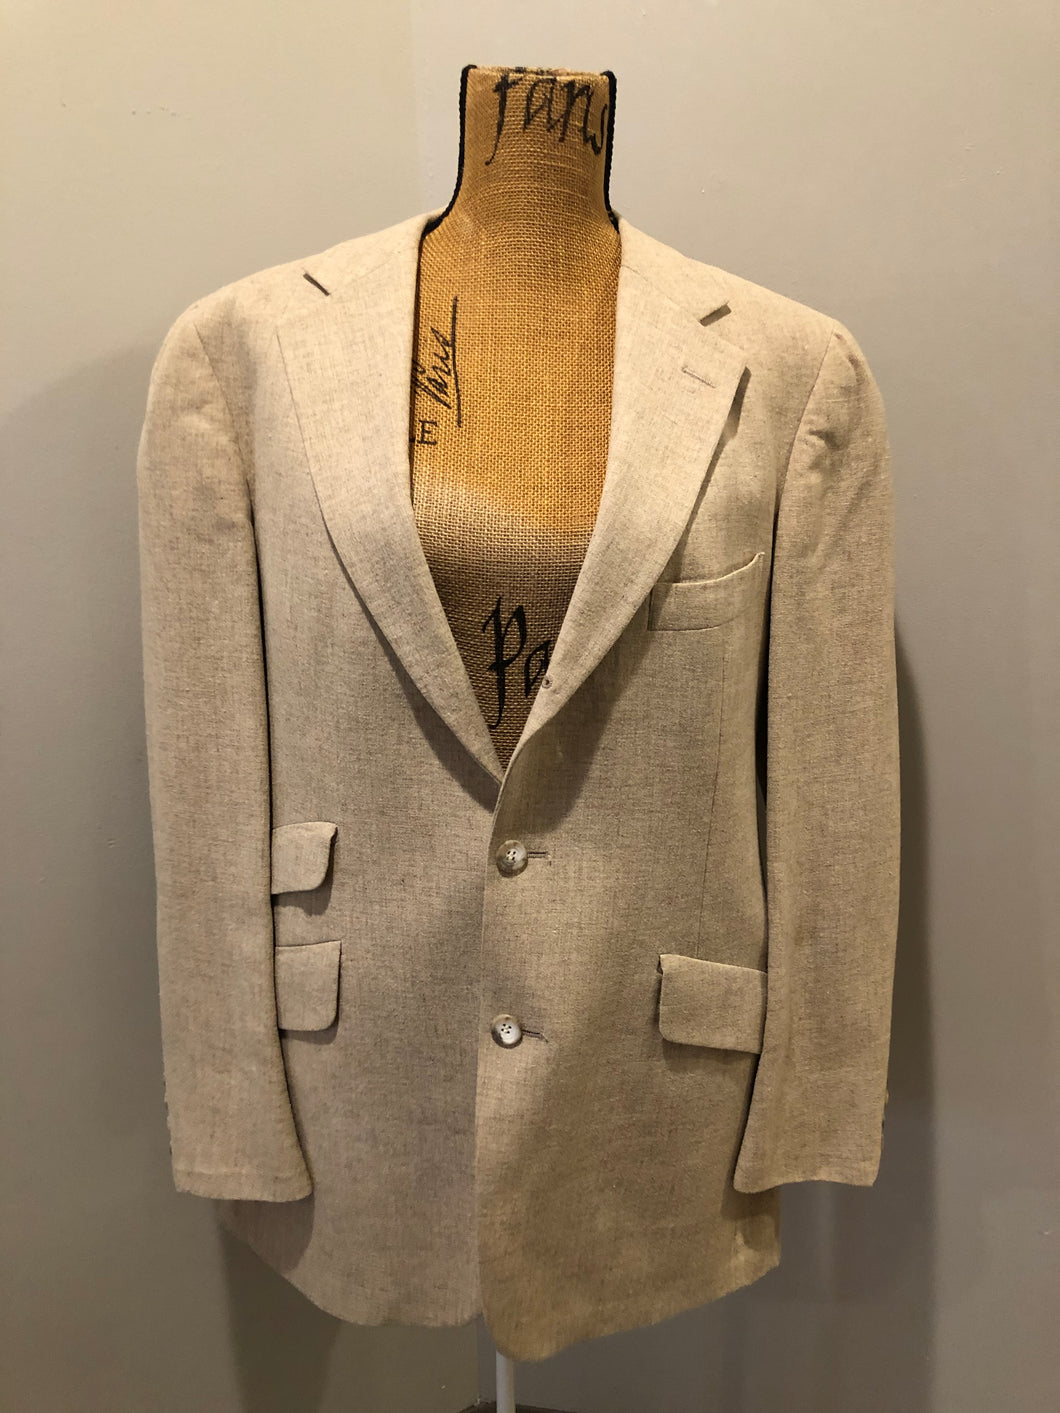 Kingspier Vintage - Chaps by Ralph Lauren light beige two piece suit sold at Martini Carl Boston. Jacket is a three button notch lapel with three flap pockets and a breast pocket. The pants are flat front with two slash pockets, a tiny flap pocket in the front and two back pockets.